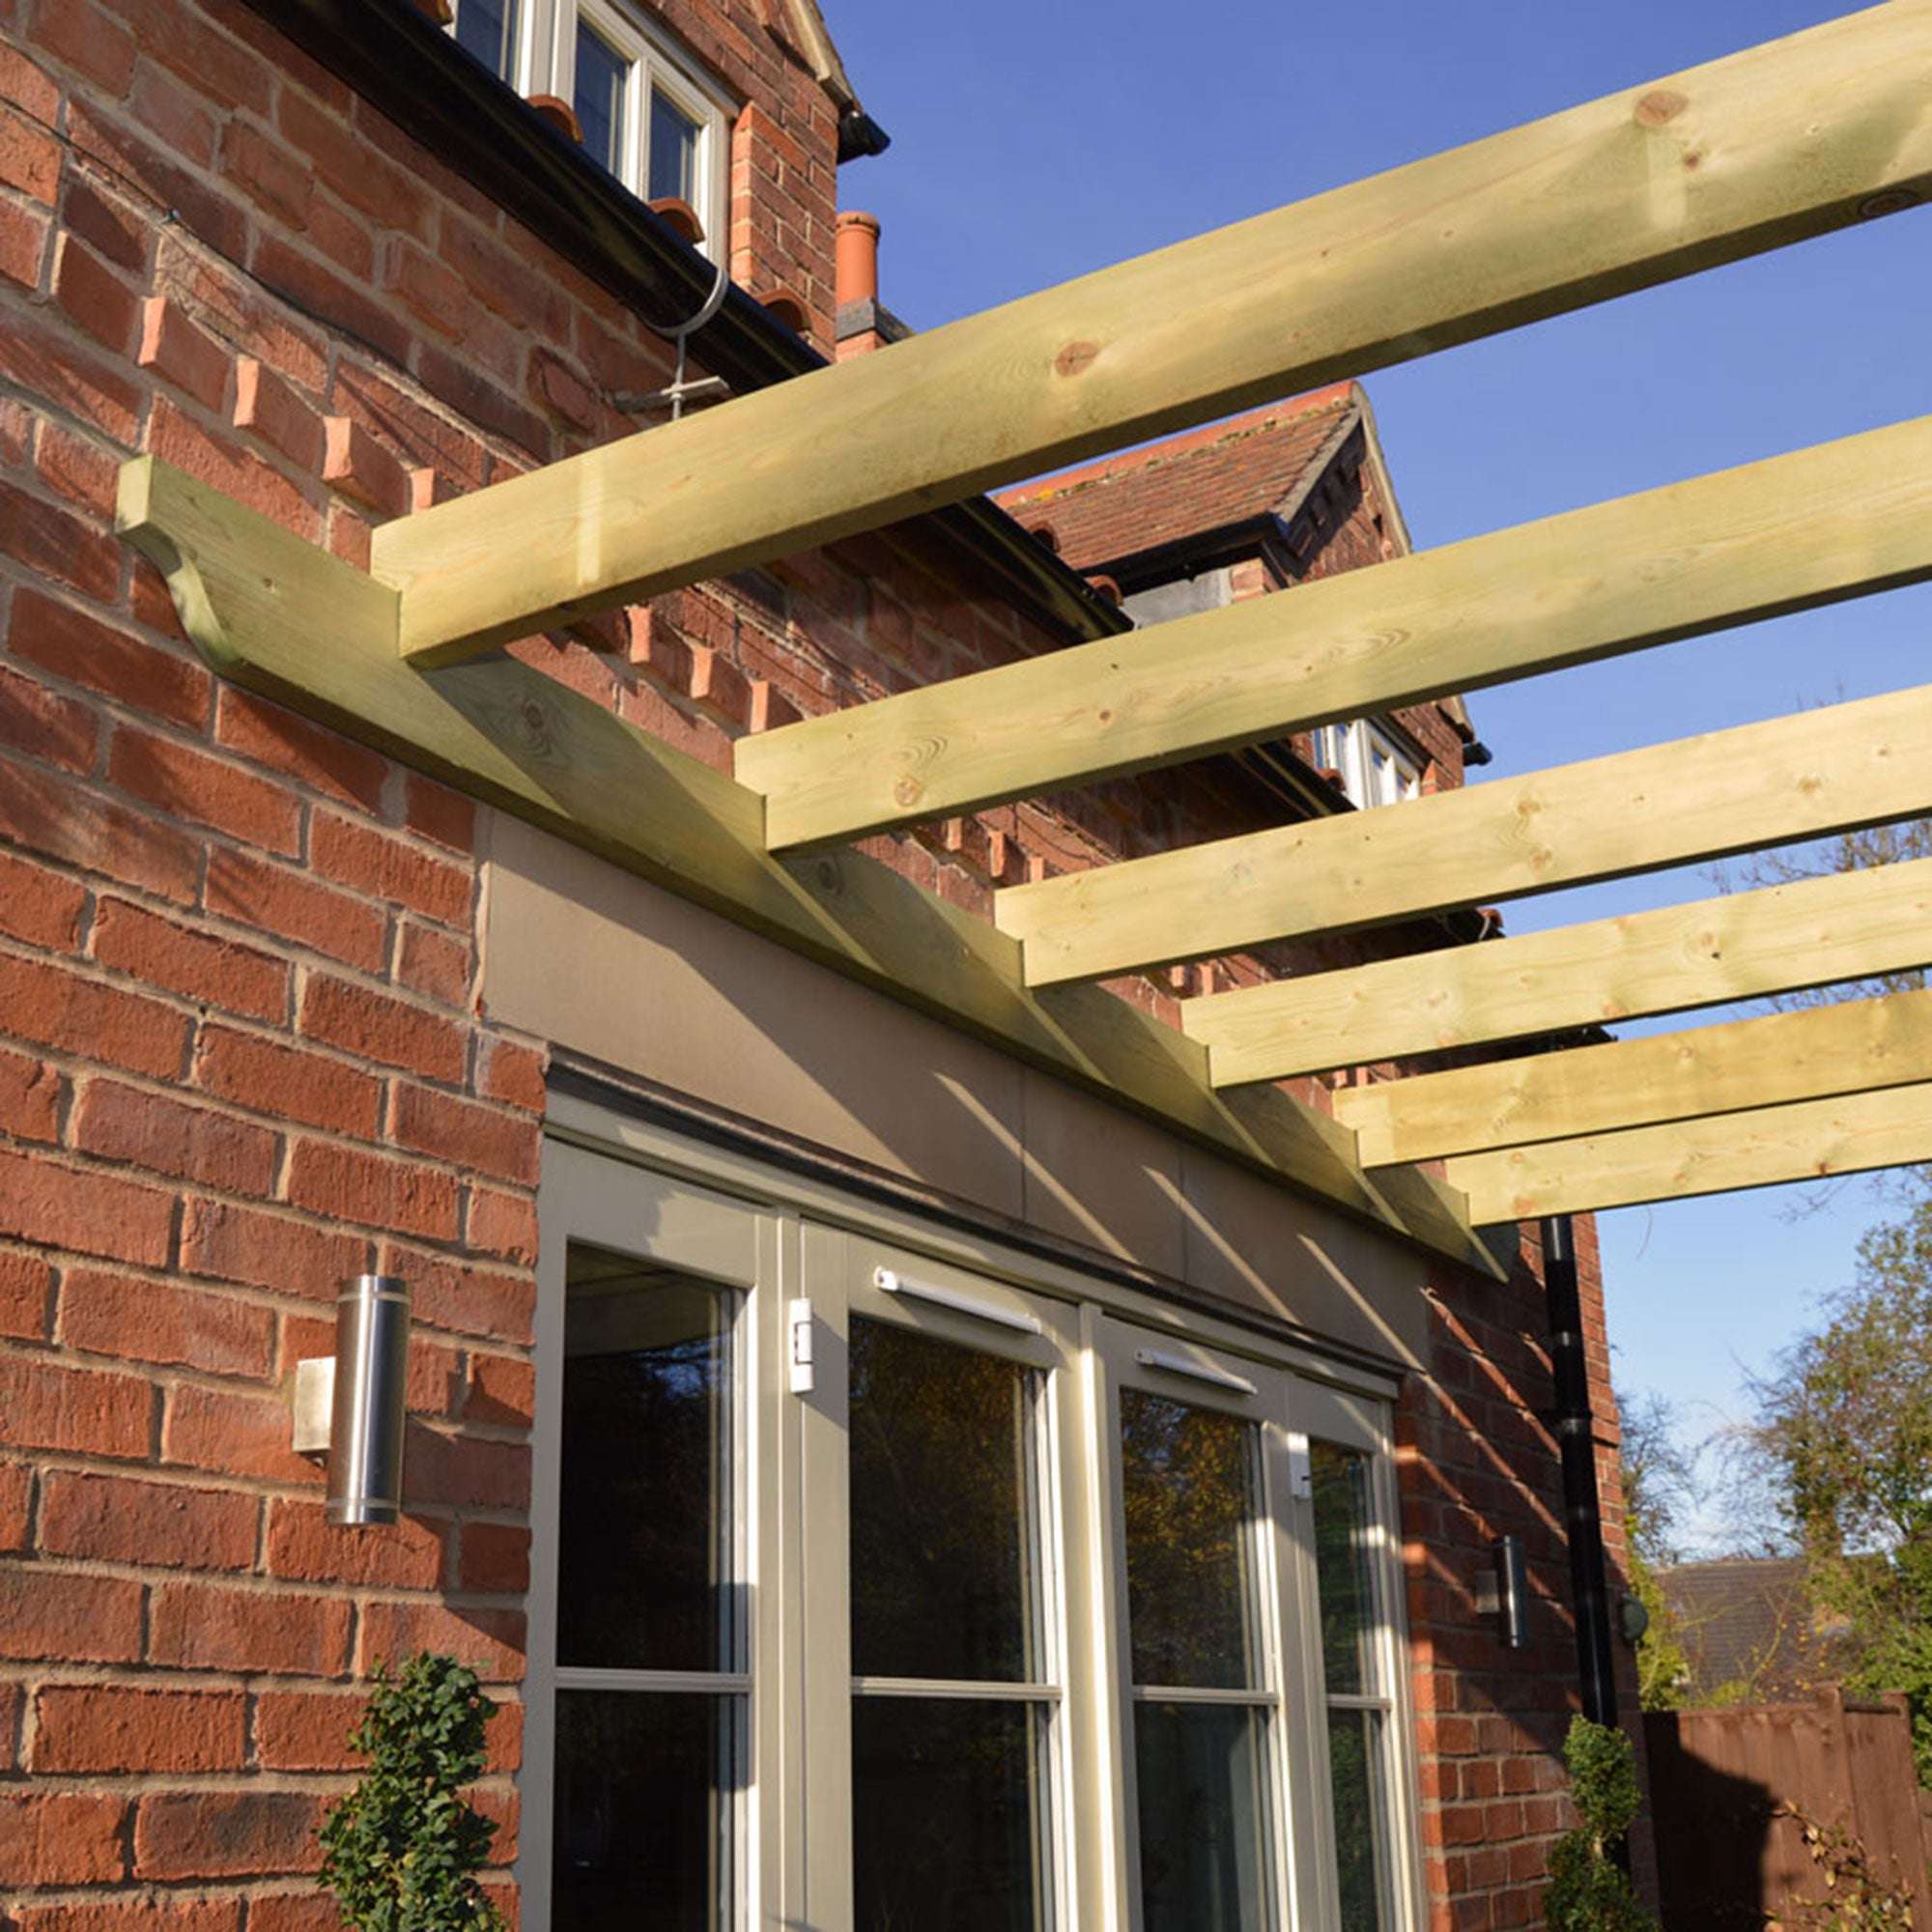 Exceptional Garden:Lean To Garden Pergola with Two Posts